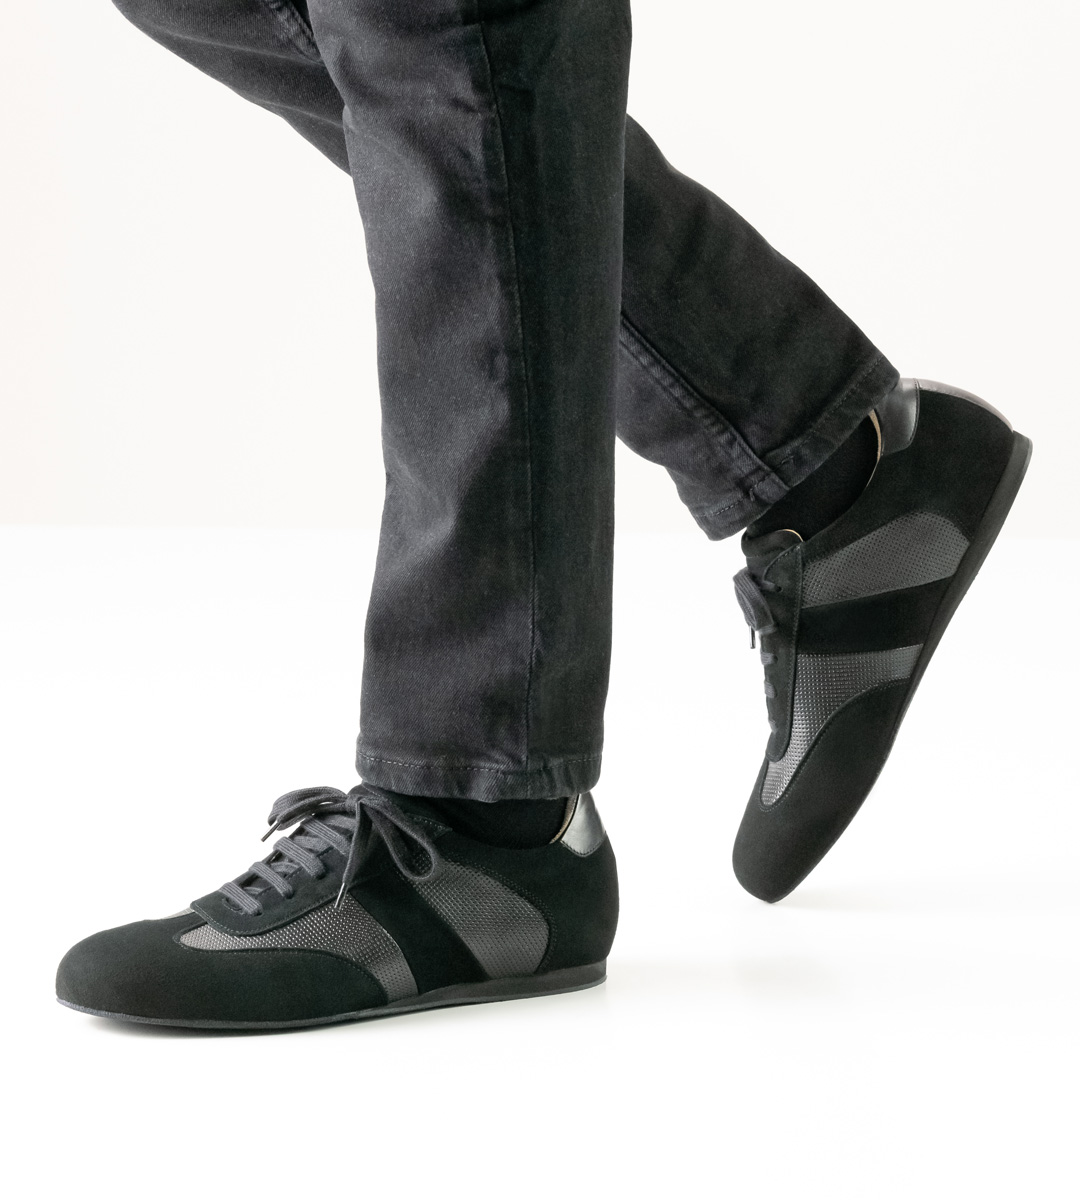 black men's dance shoe for loose insoles in combination with black jeans